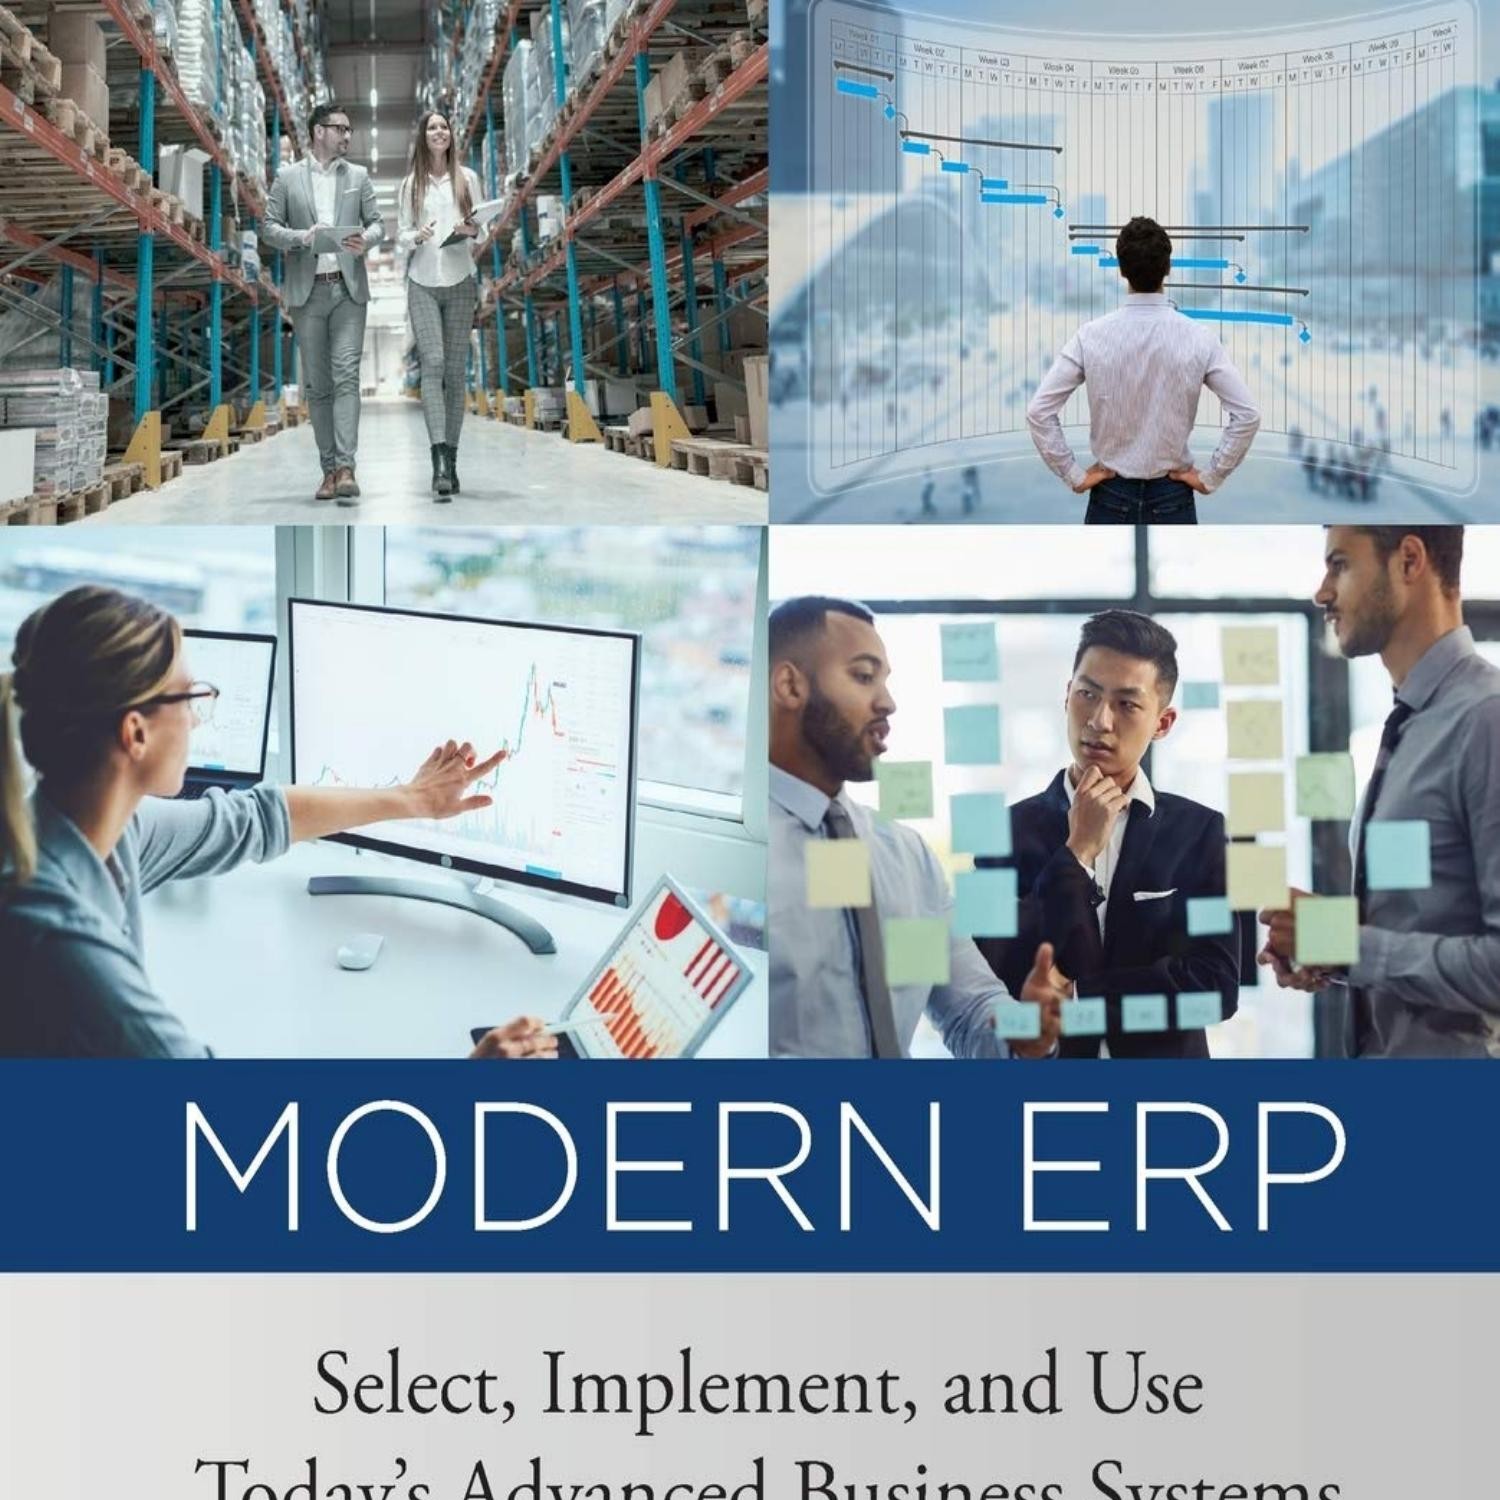 Modern Erp Select Implement And Use Today's Advanced Business Systems